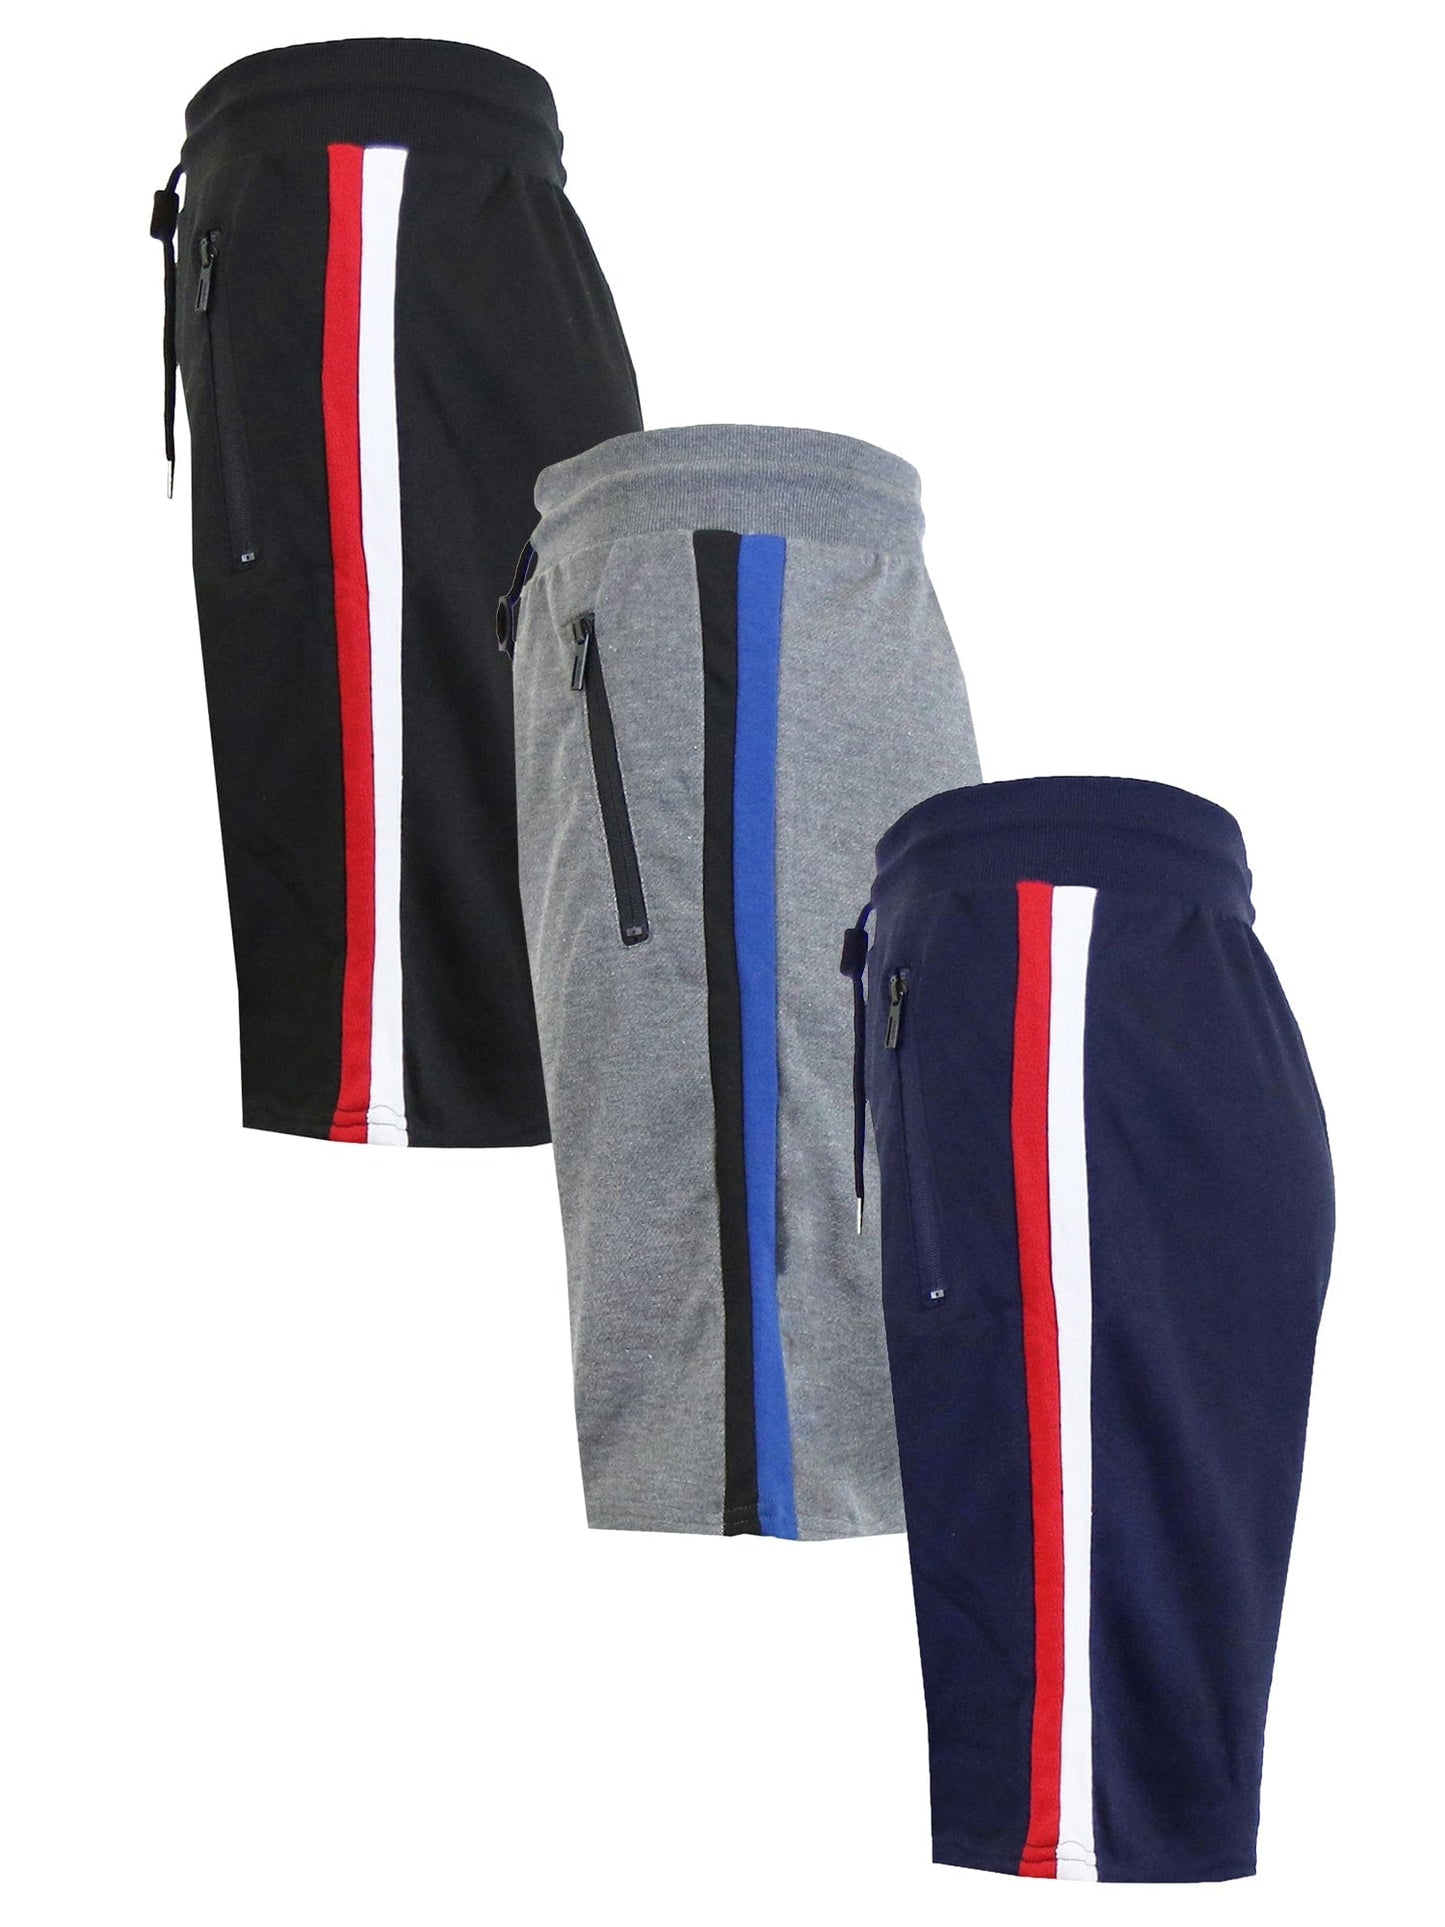 3-PACK Men's French Terry Sweat Shorts Casual Summer Set - GalaxybyHarvic